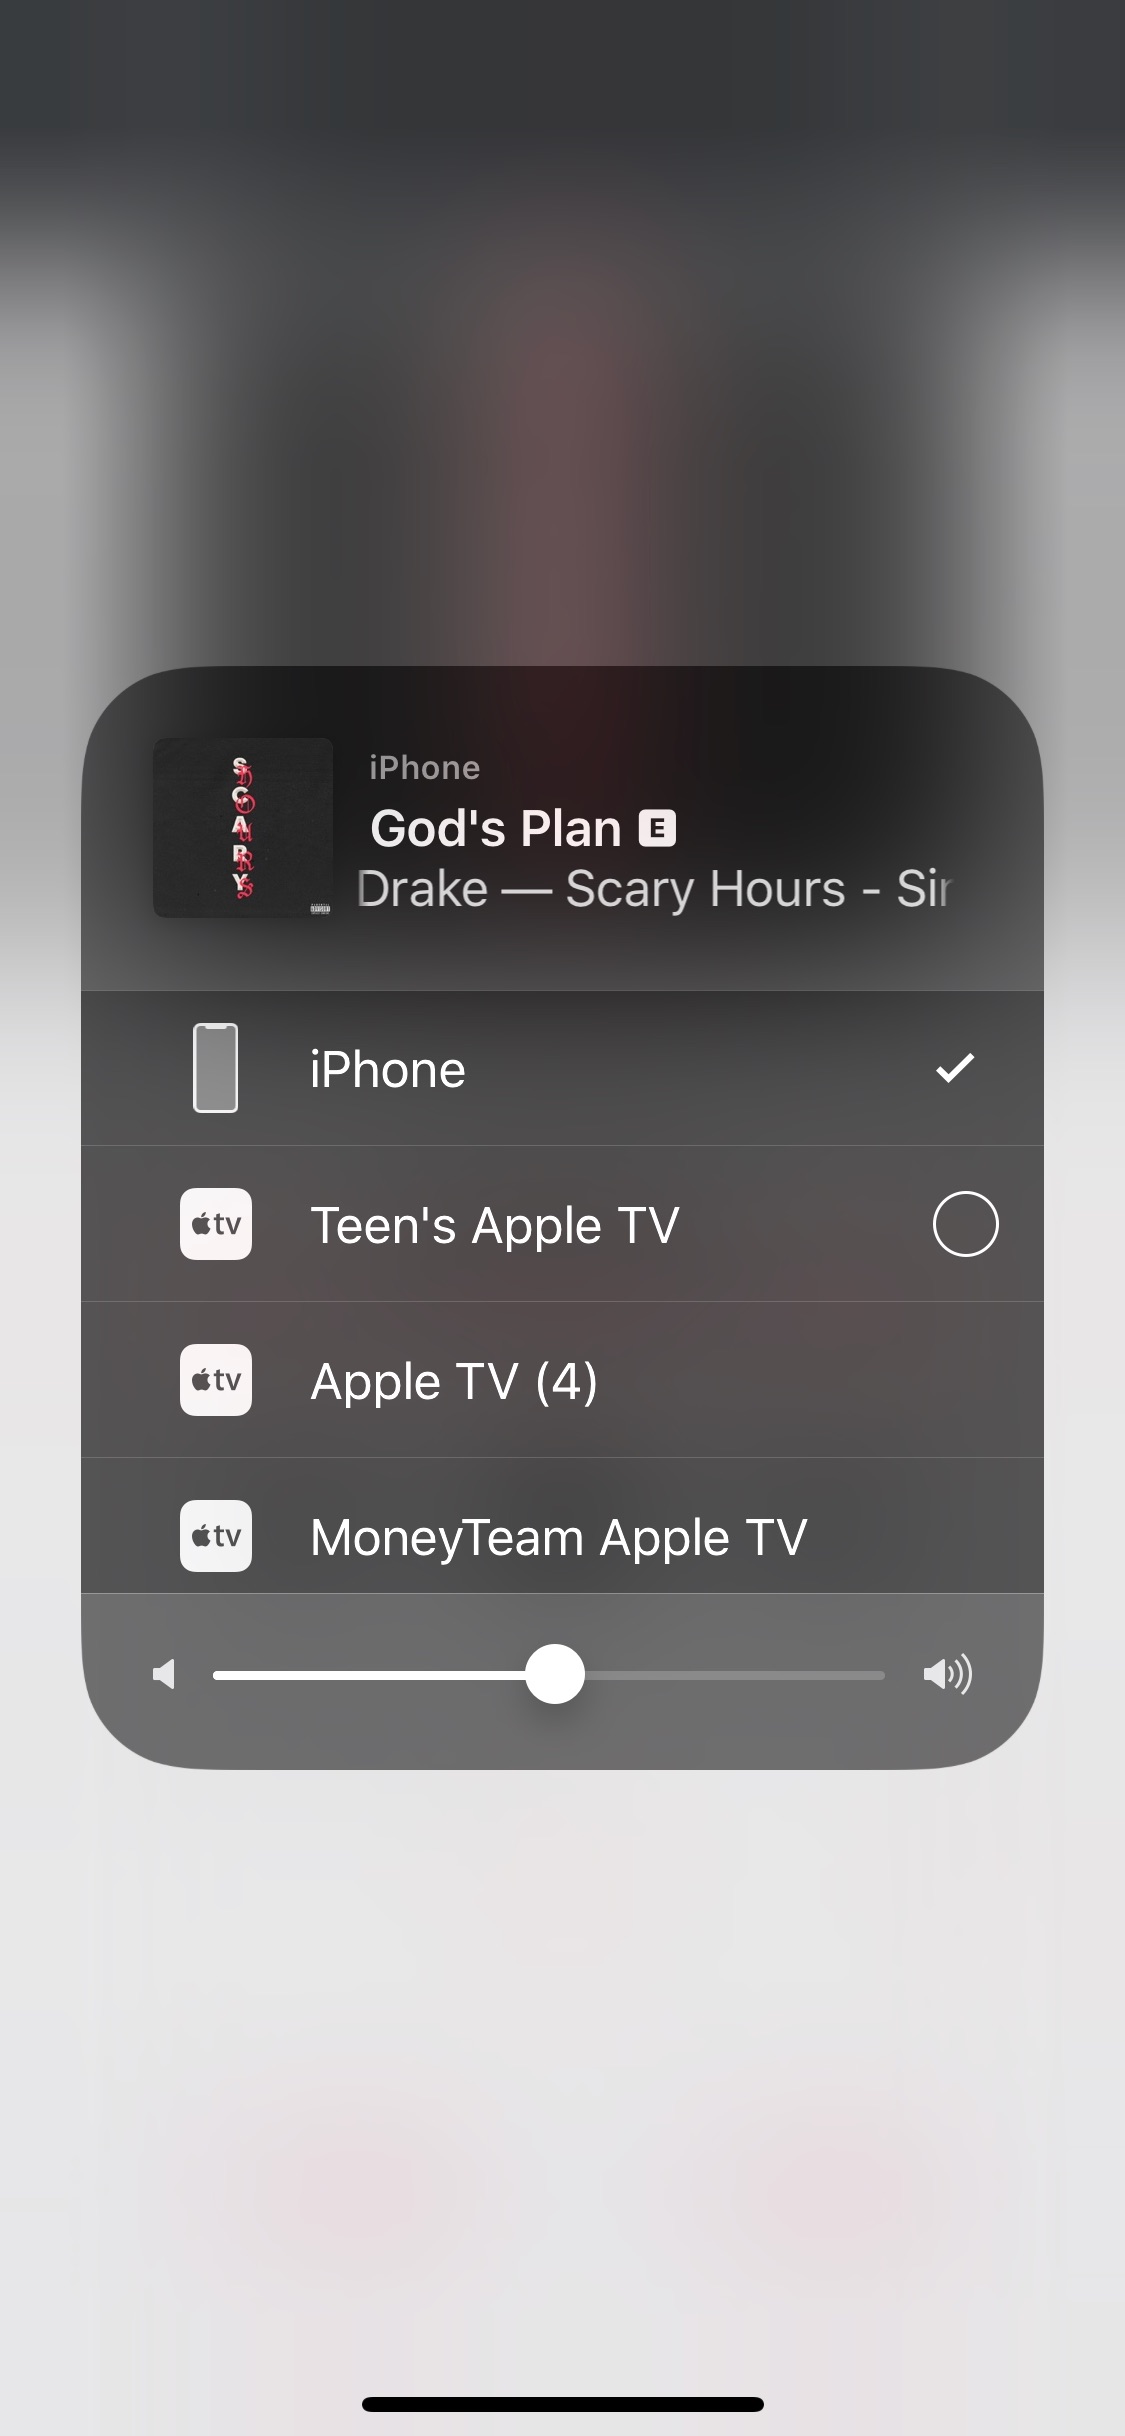 AirPlay 2 With Multi-Room Audio Streaming Arrives in iOS 11.3 Beta and tvOS 11.3 Beta